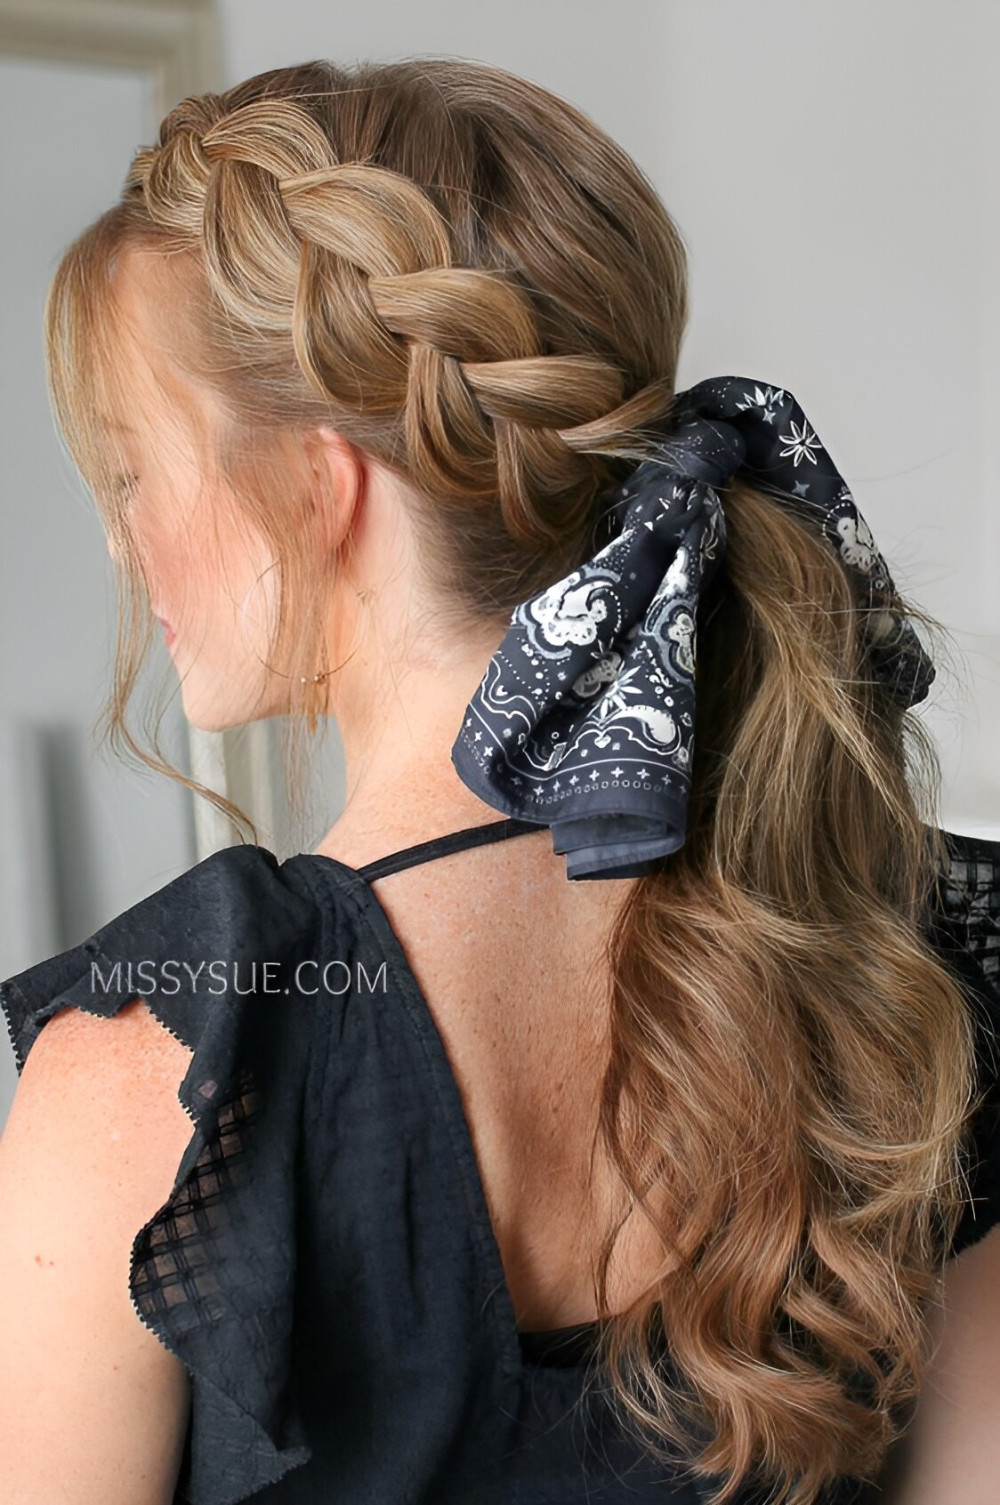 Charming Braids With A Bow